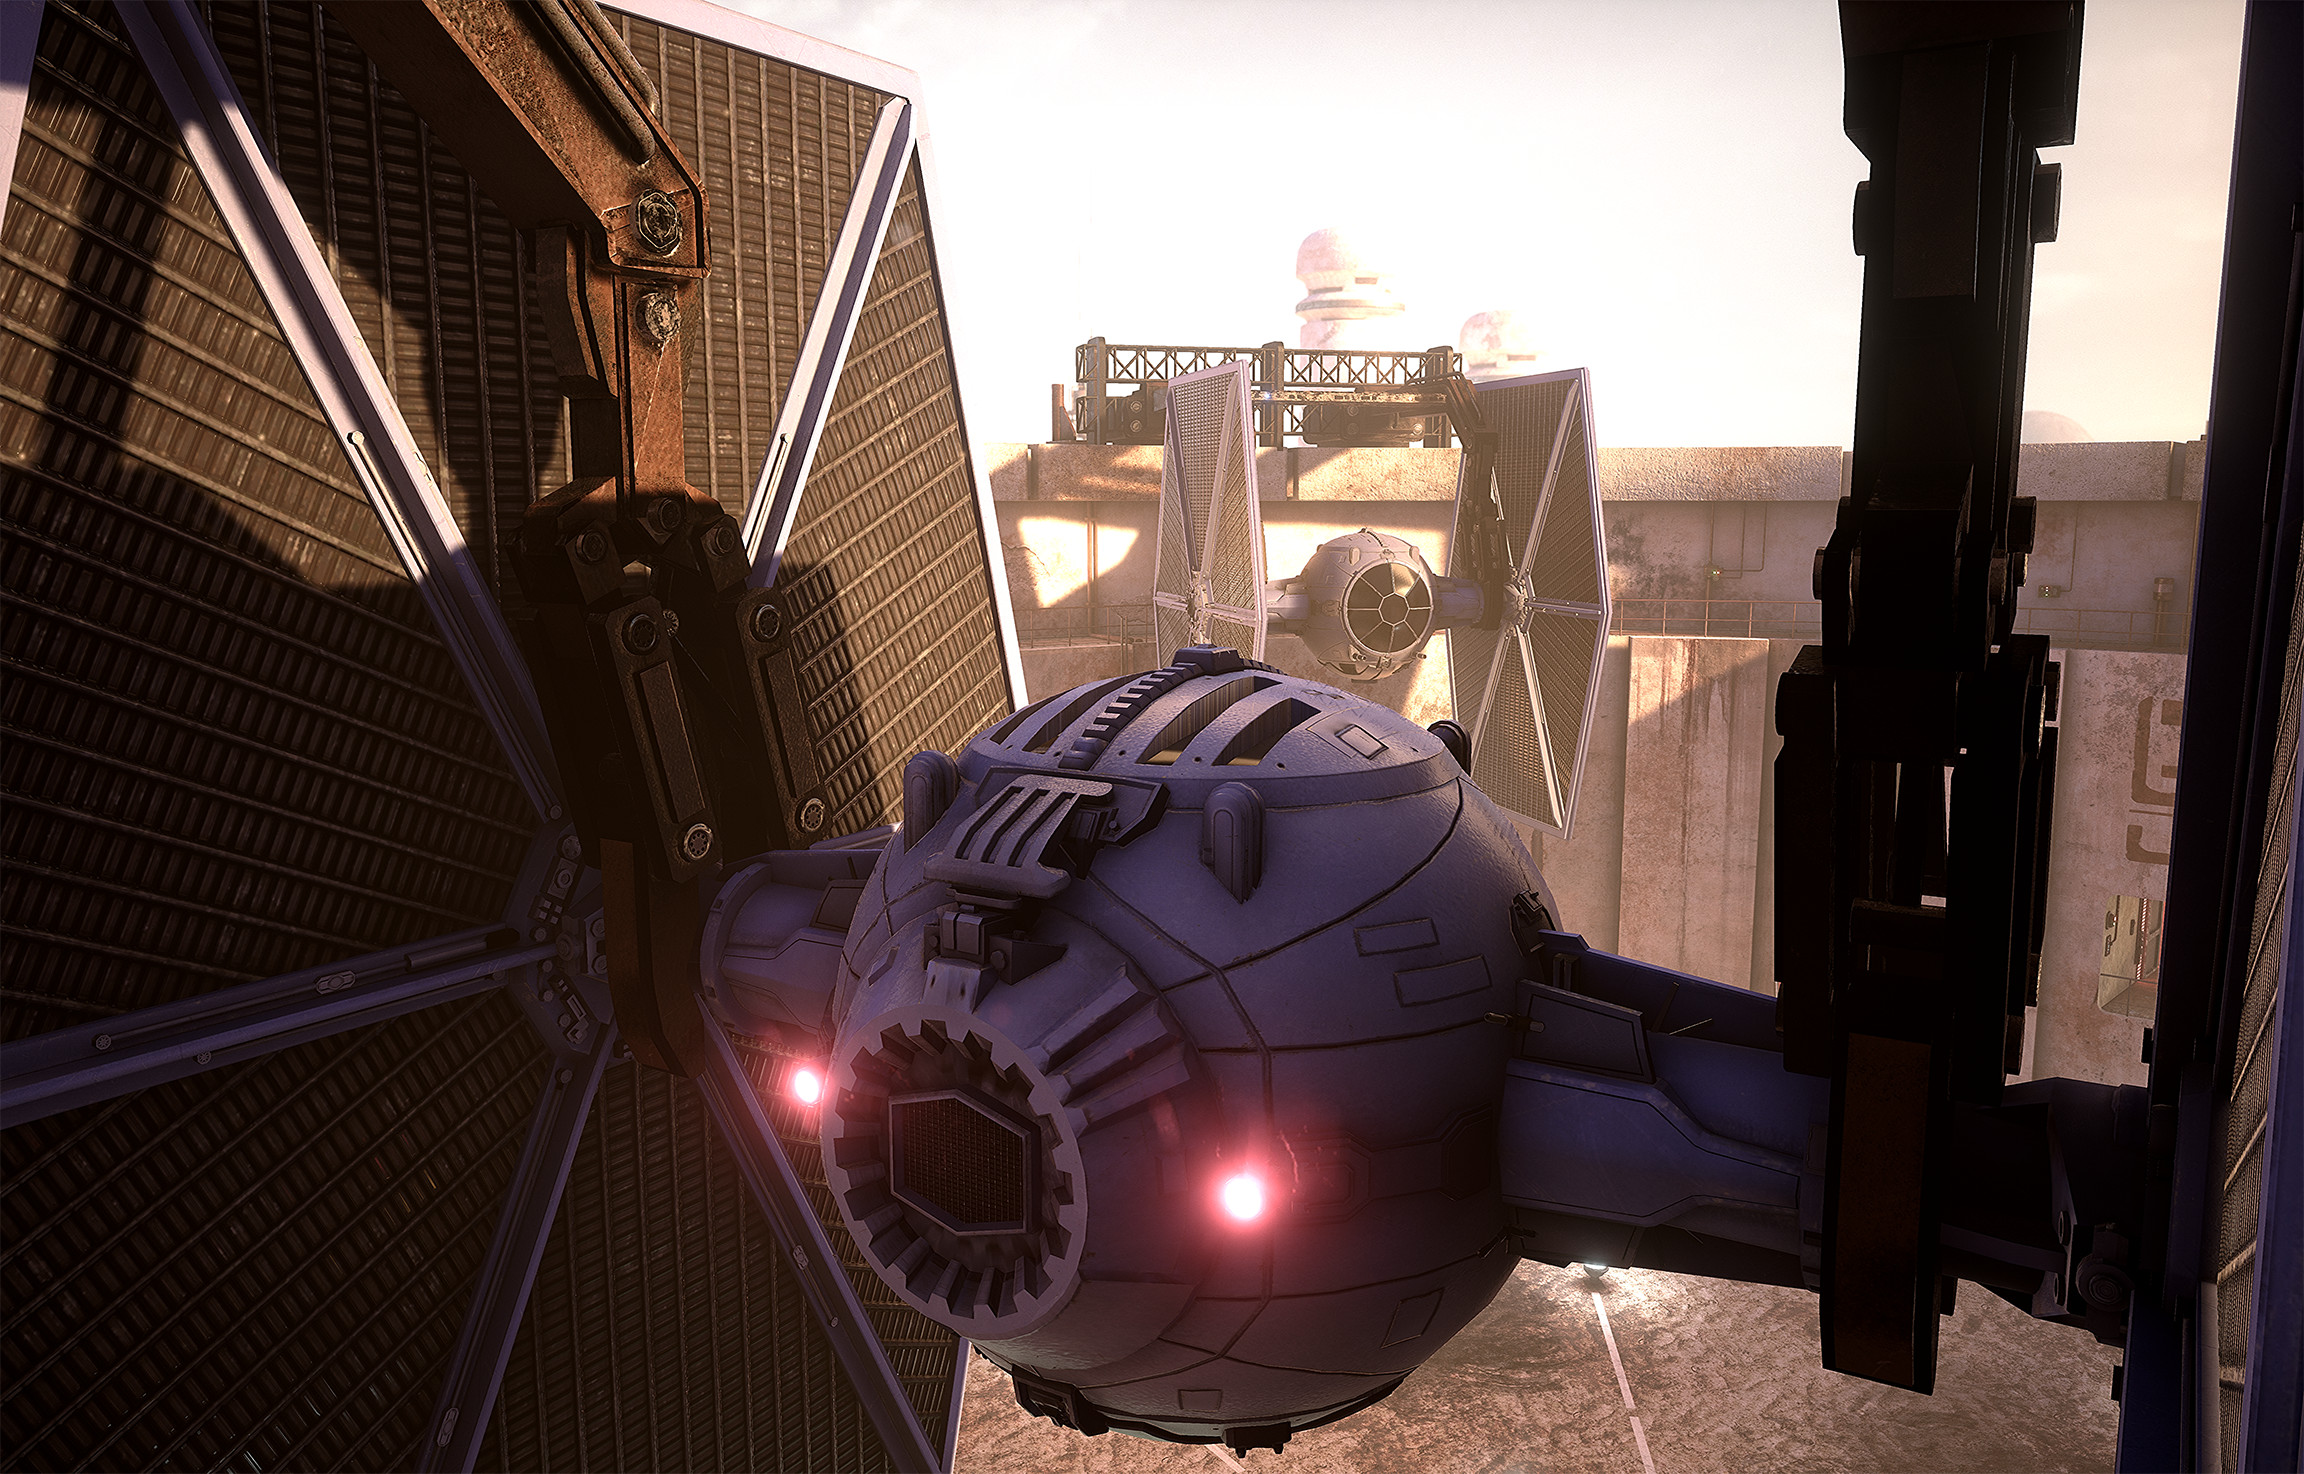 Tie Fighter: model, textures, shader
Tie Clamp: textures, shader